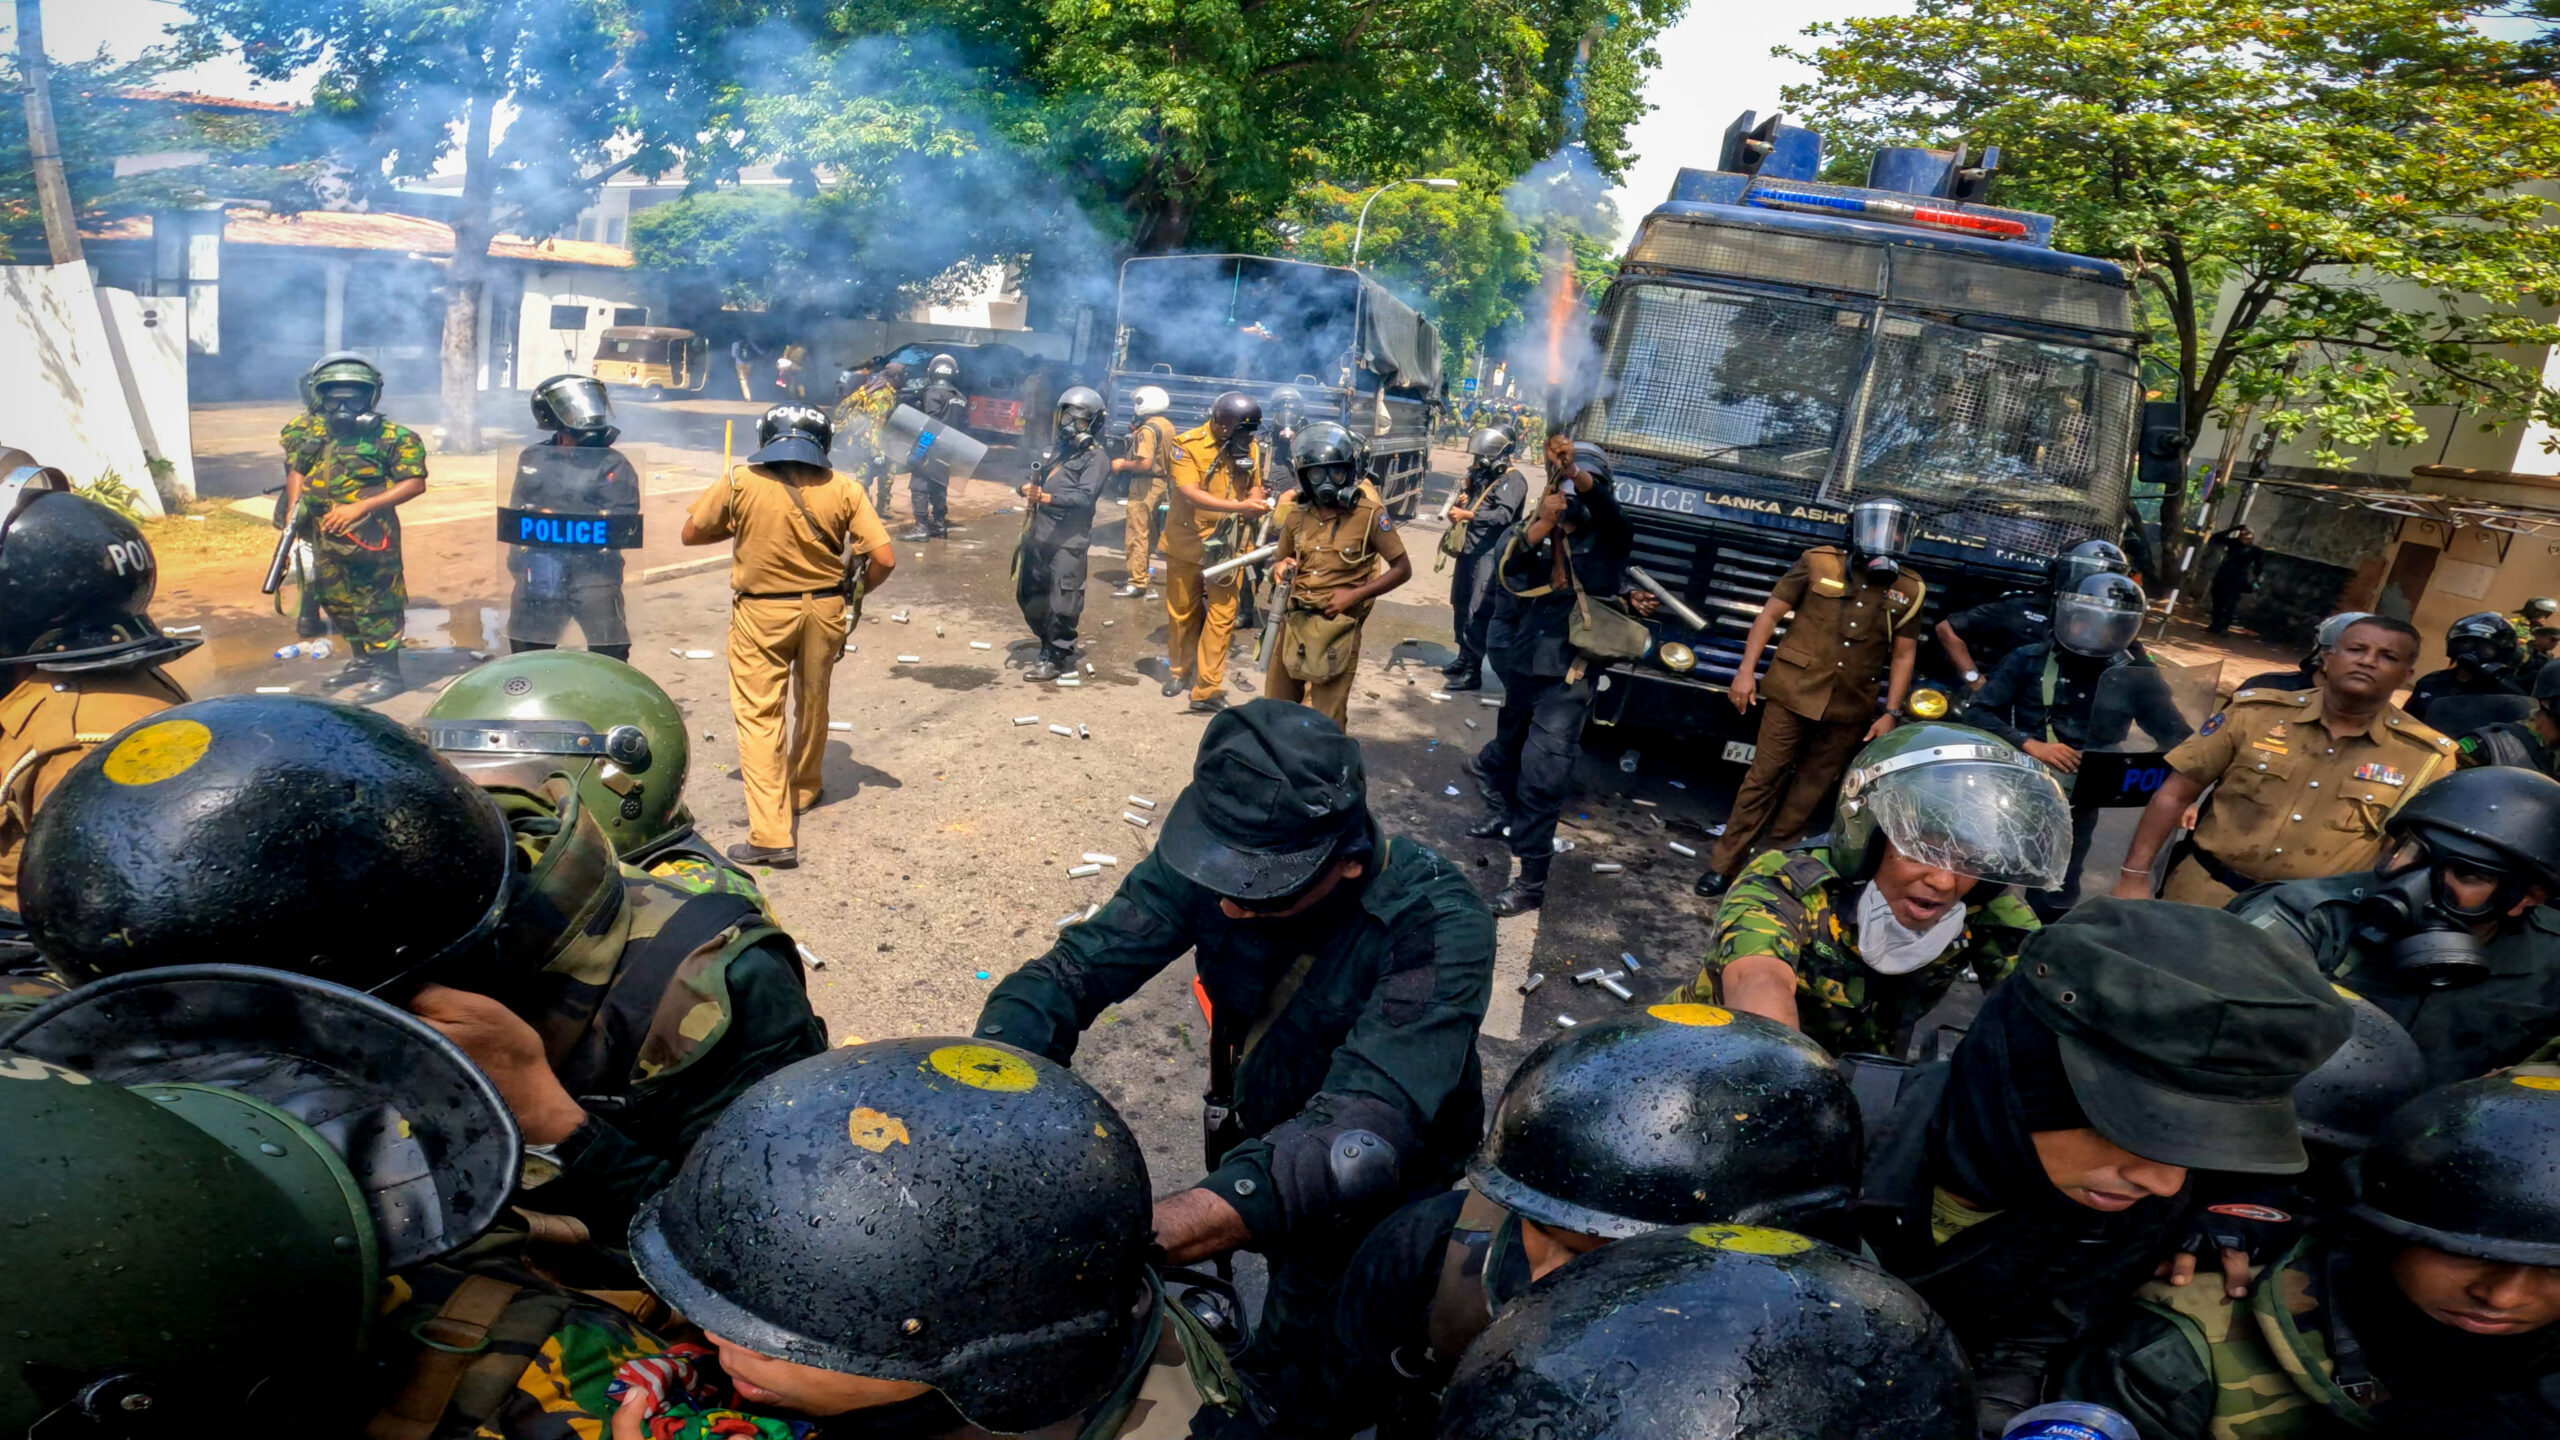 Sri Lanka: Authorities’ crackdown on protest rights must end